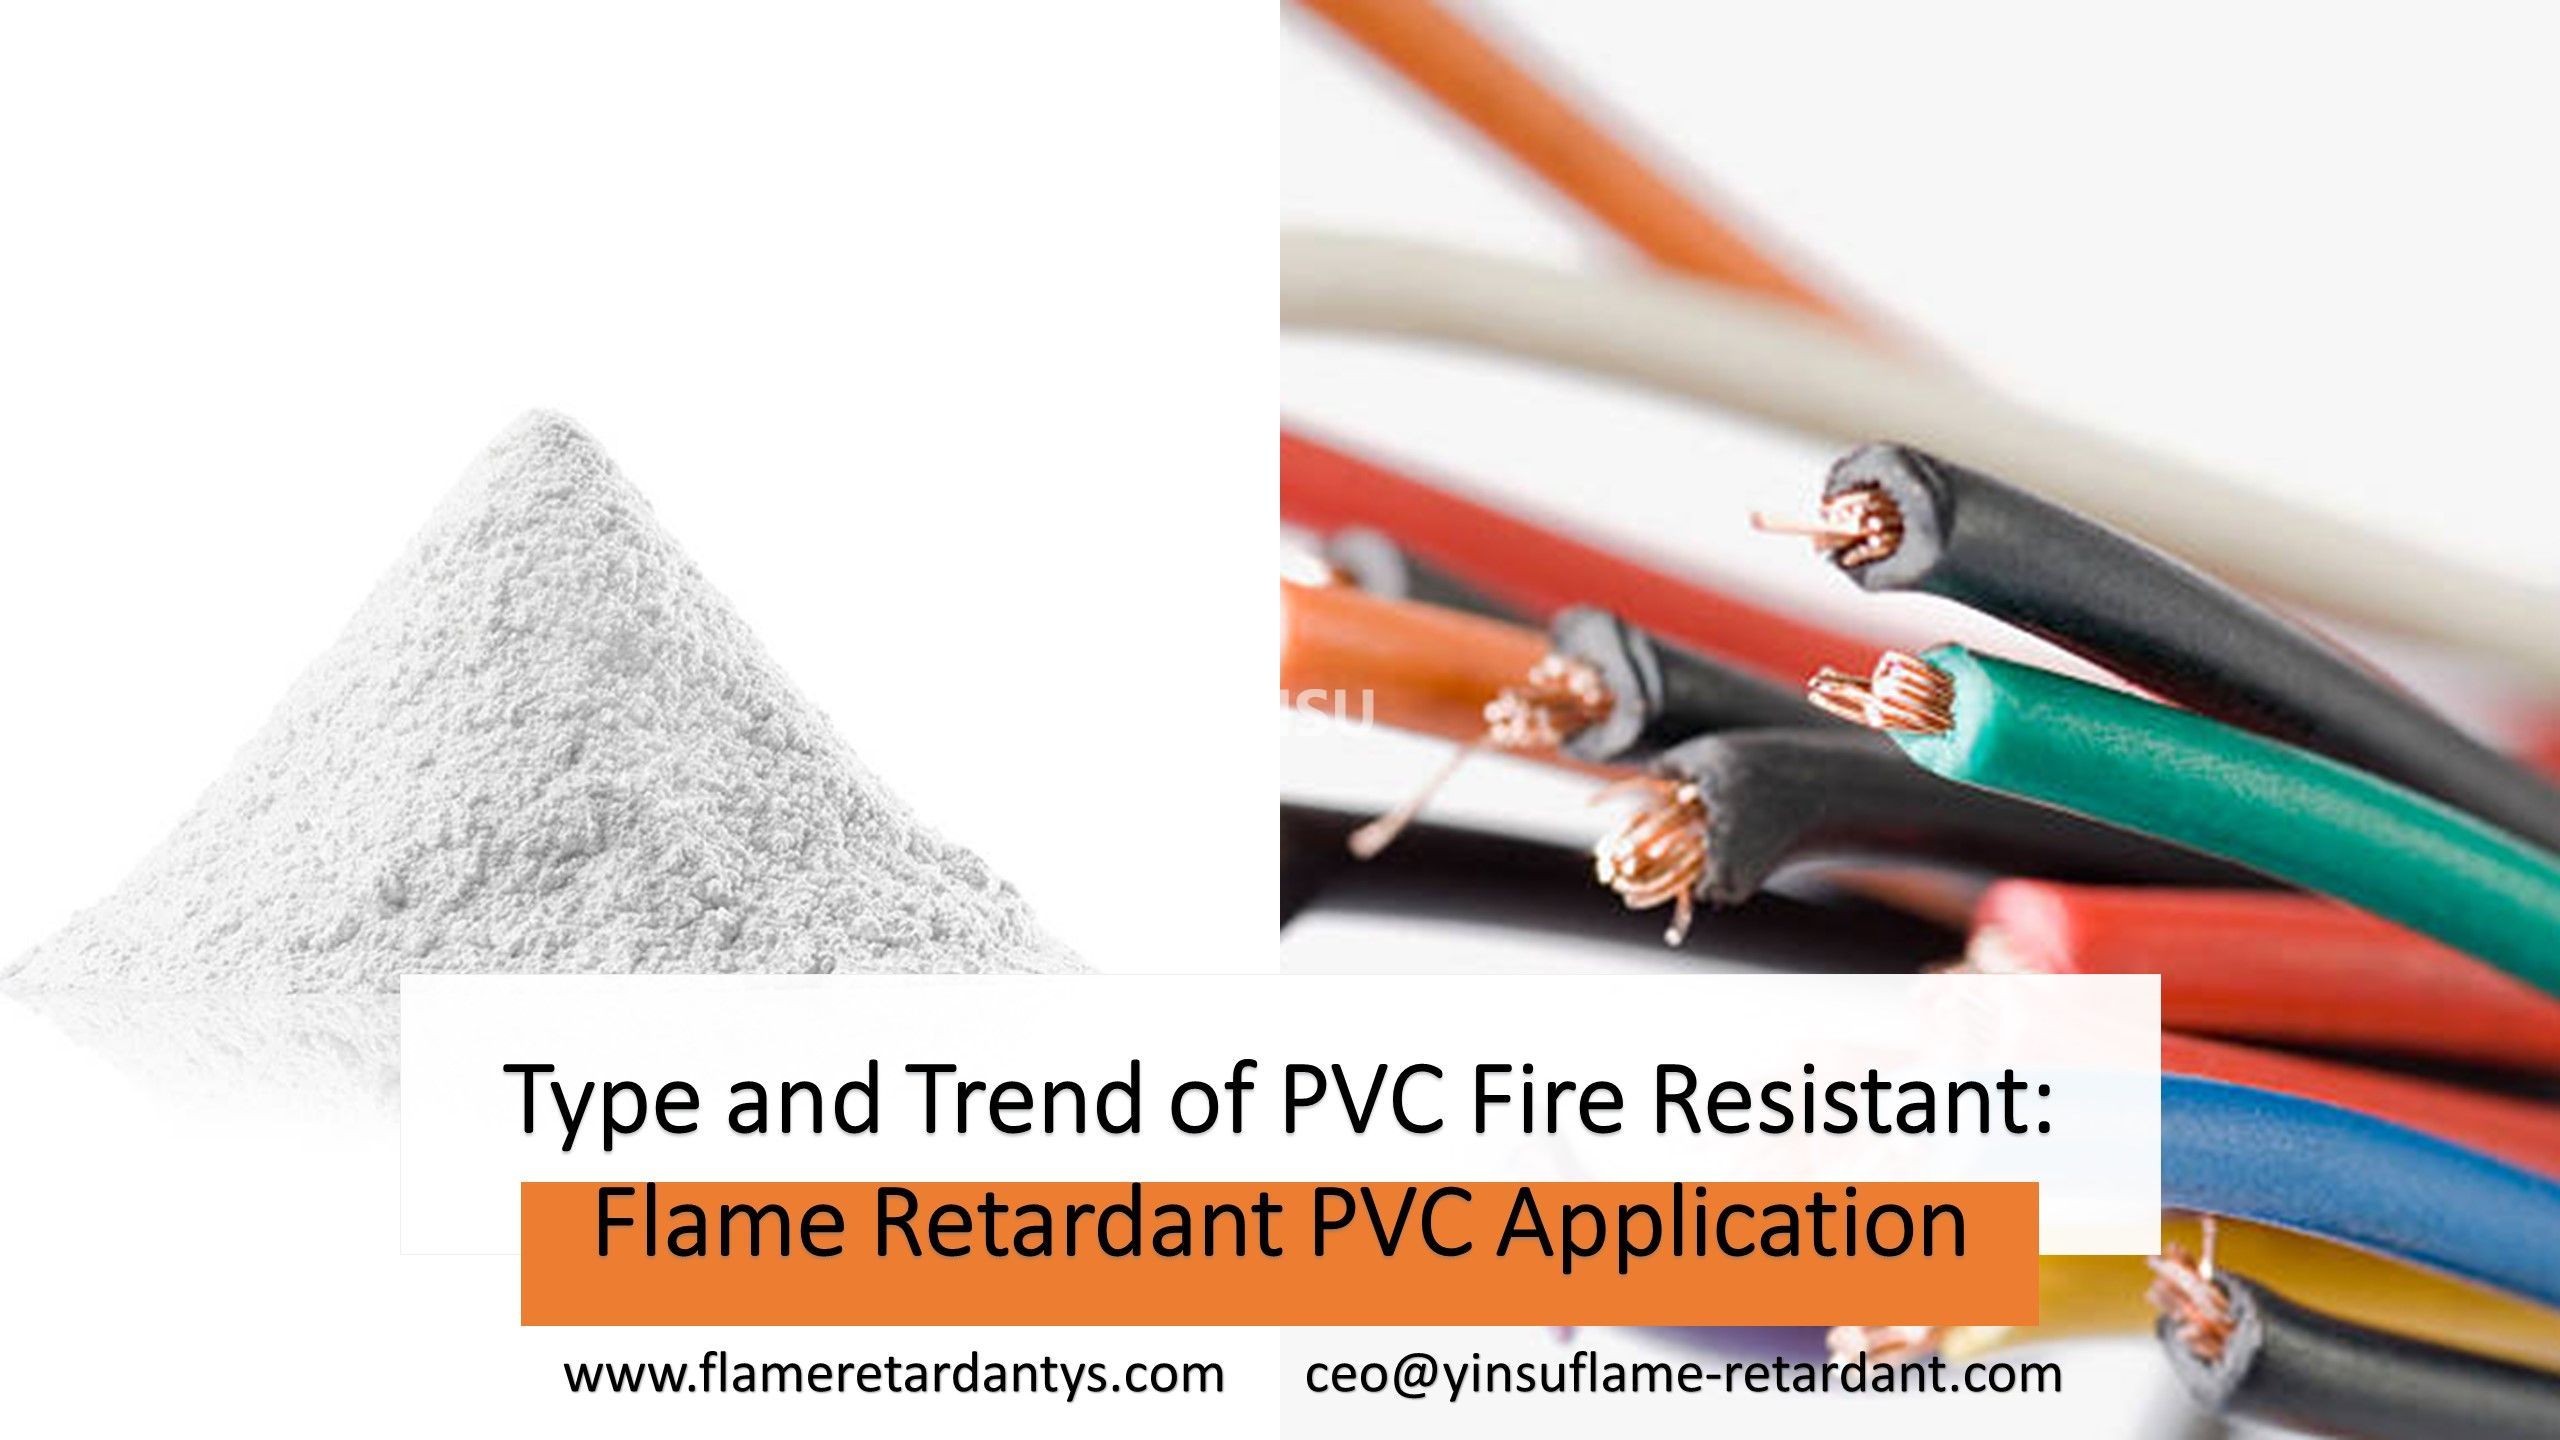 Type and Trend of PVC Fire Resistant Flame Retardant PVC Application